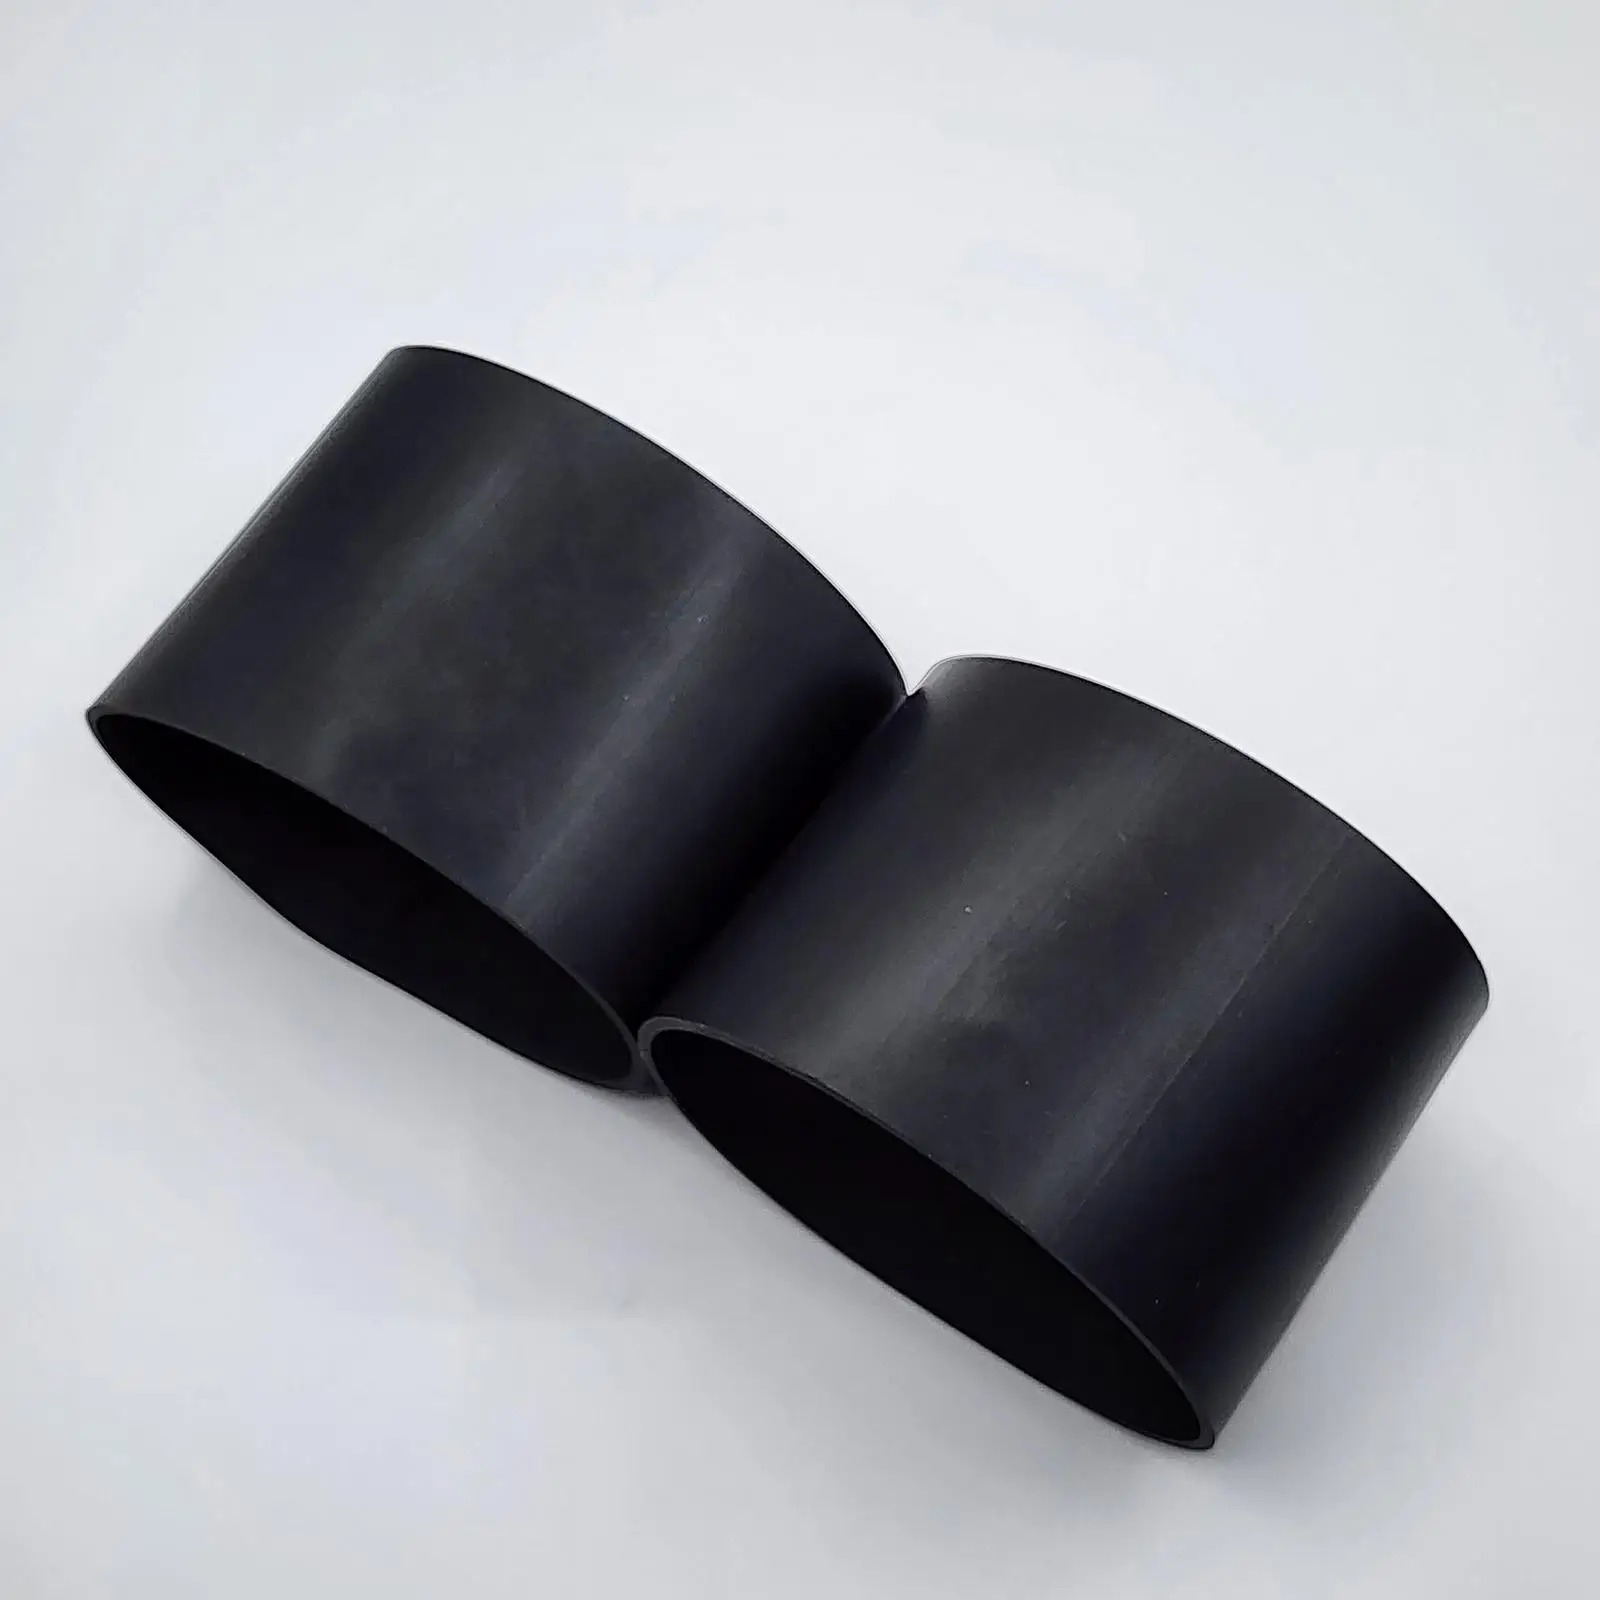 2x Rubber Air Inlet Flexible Adaptor Replacement Direct Replaces for  Outlander 400 Max 400 Easy to Install Durable